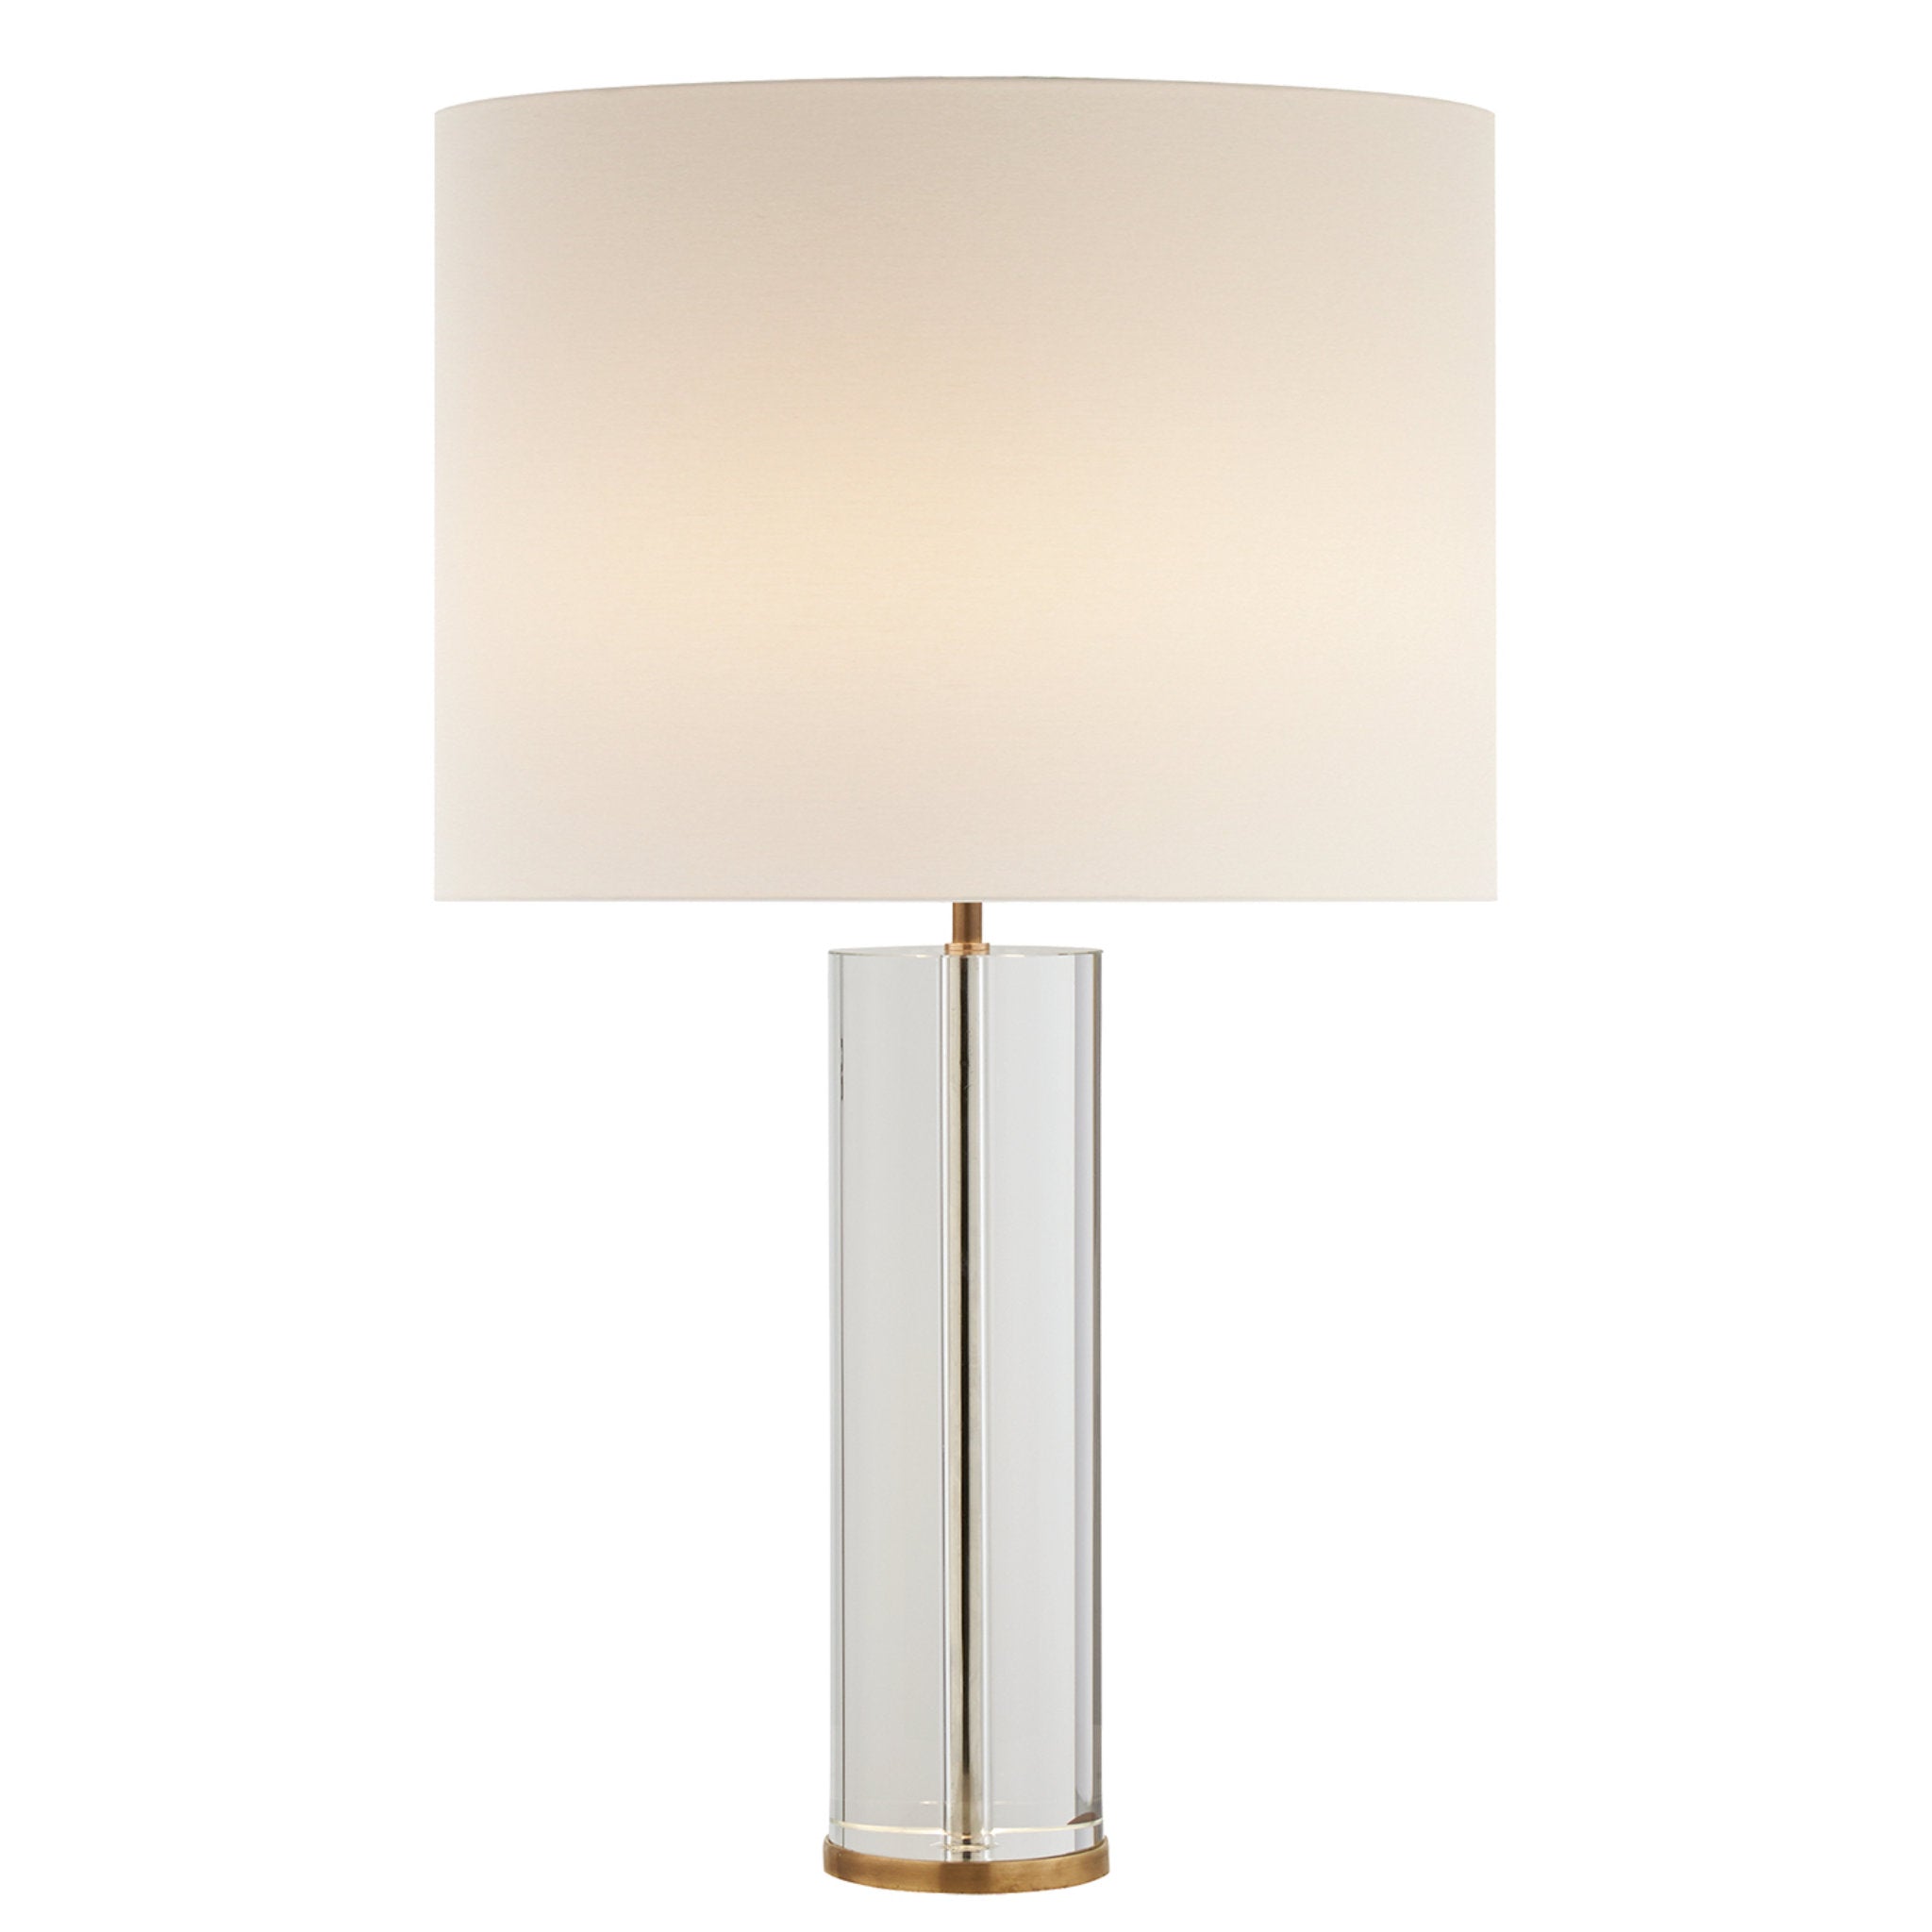 AERIN Lineham Table Lamp in Crystal and Hand-Rubbed Antique Brass with Linen Shade